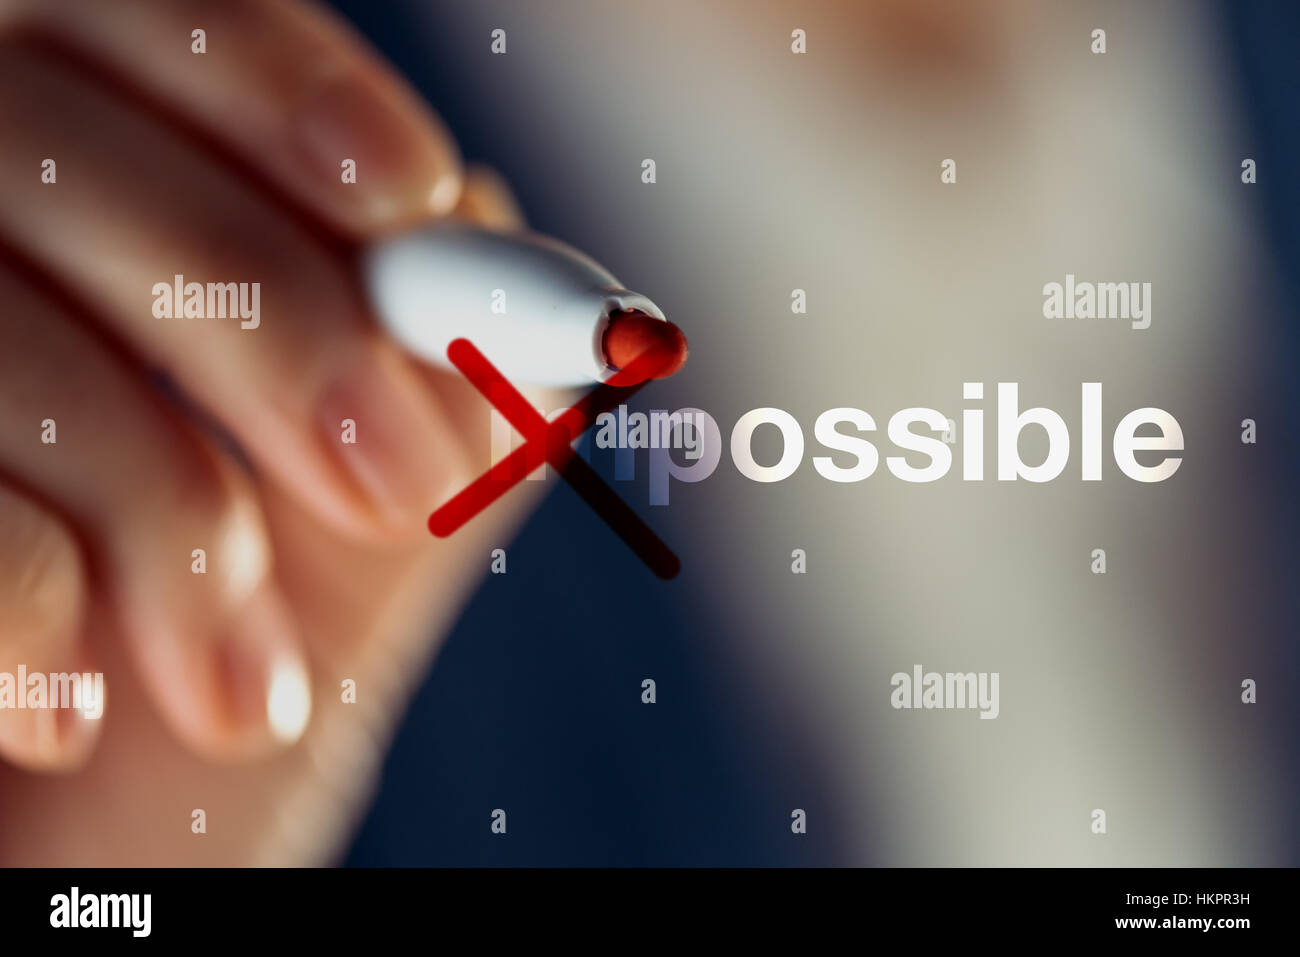 Making the impossible possible with red marker pen, business concept Stock Photo